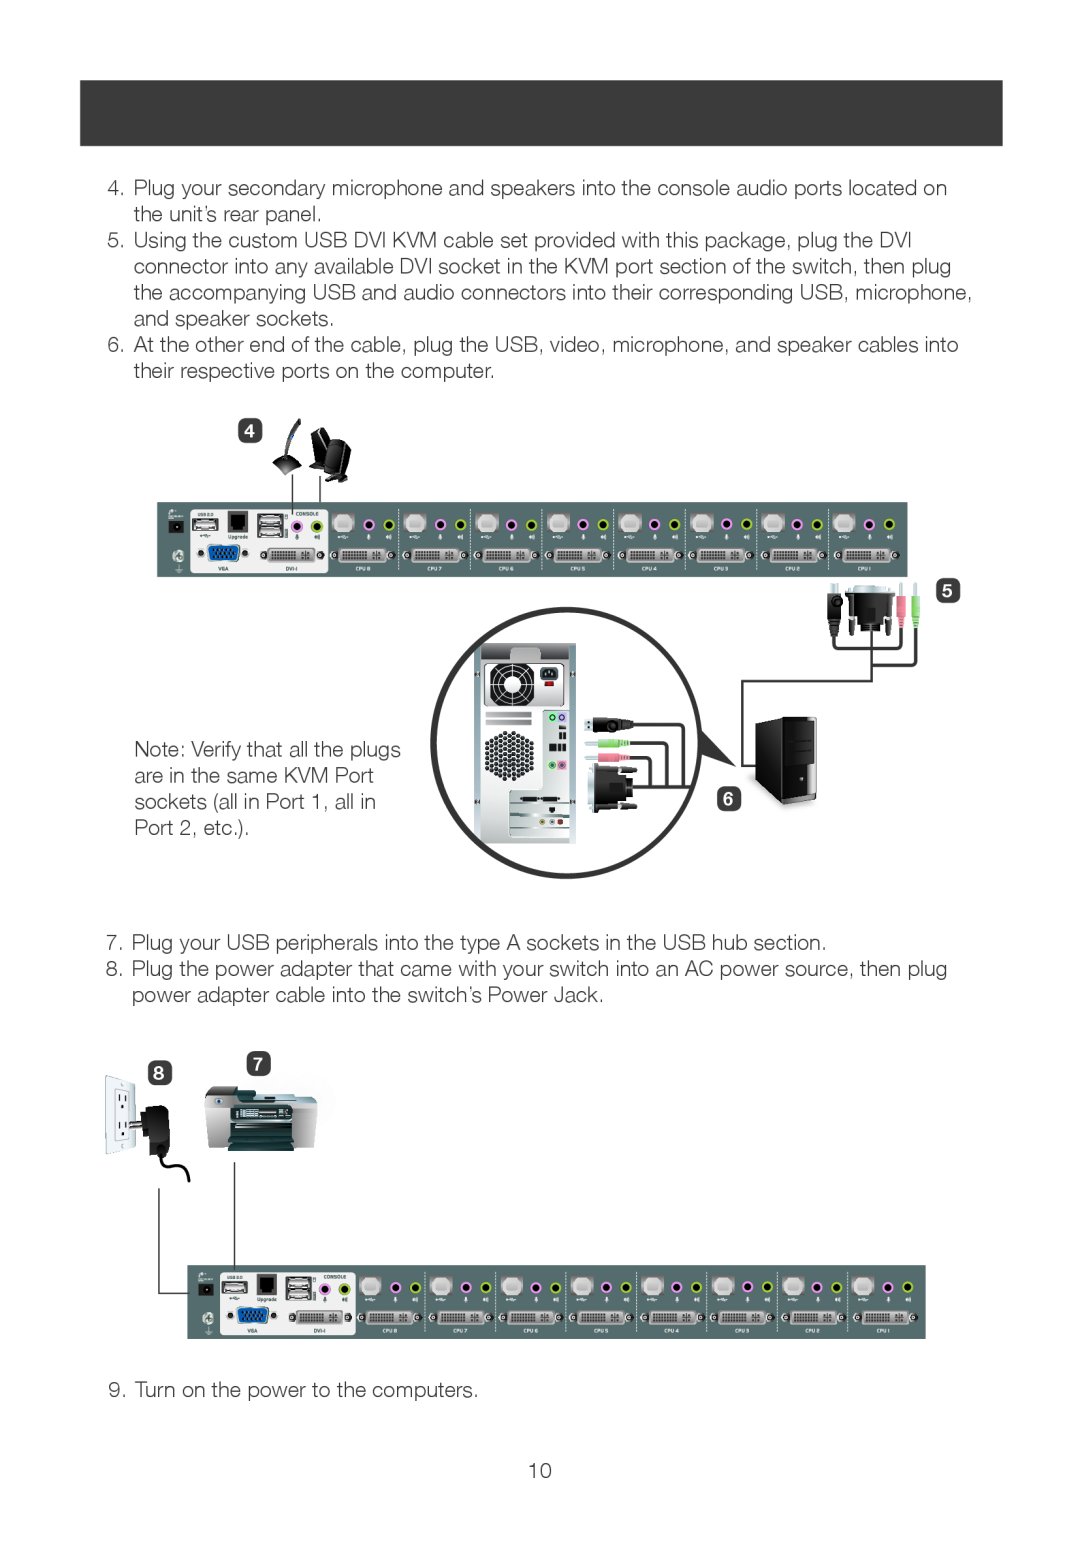 IOGear GCS1108 Note Verify that all the plugs, are in the same KVM Port, sockets all in Port 1, all in, Port 2, etc 